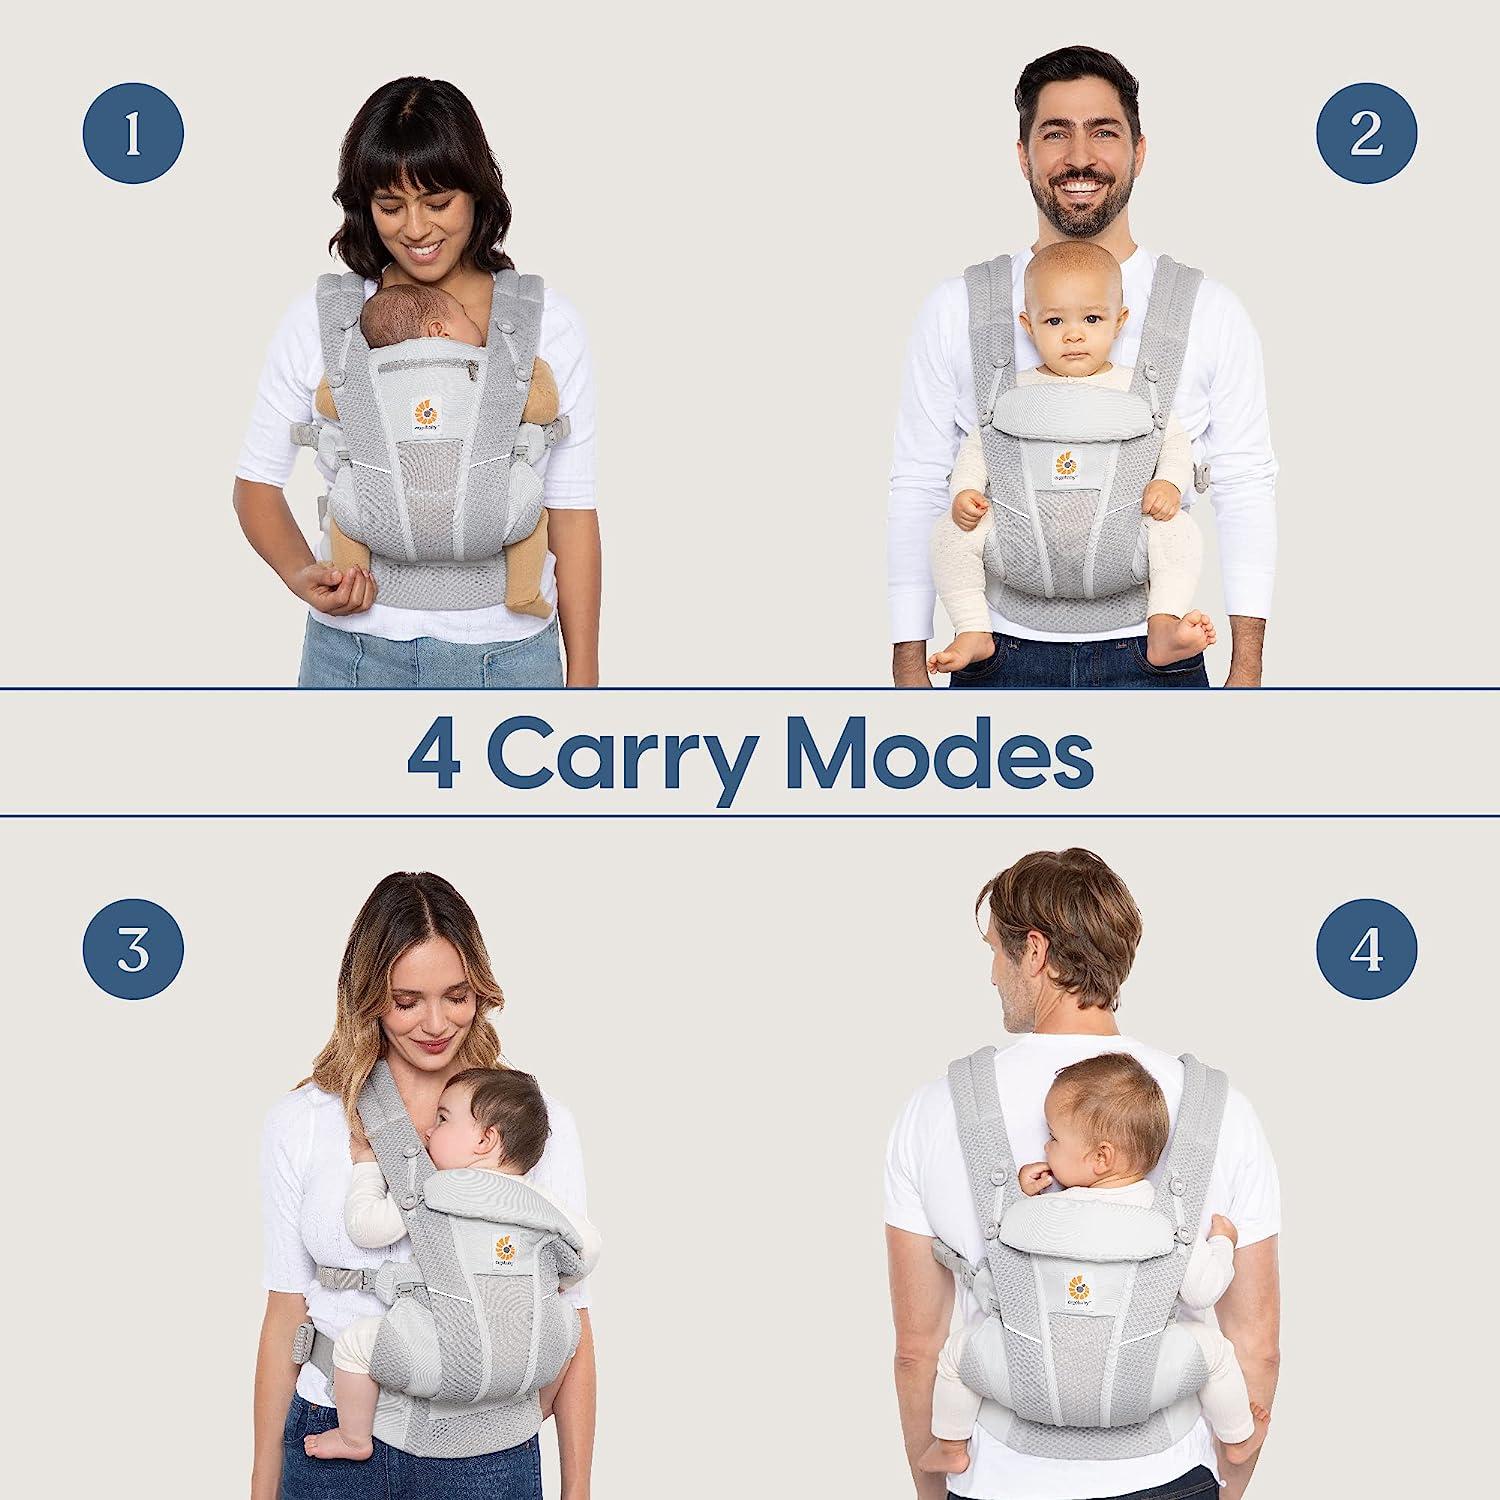 Ergobaby Omni 360 All-Position Baby Carrier for Newborn to Toddler with  Lumbar Support & Cool Air Mesh (7-45 Lb), Pearl Grey